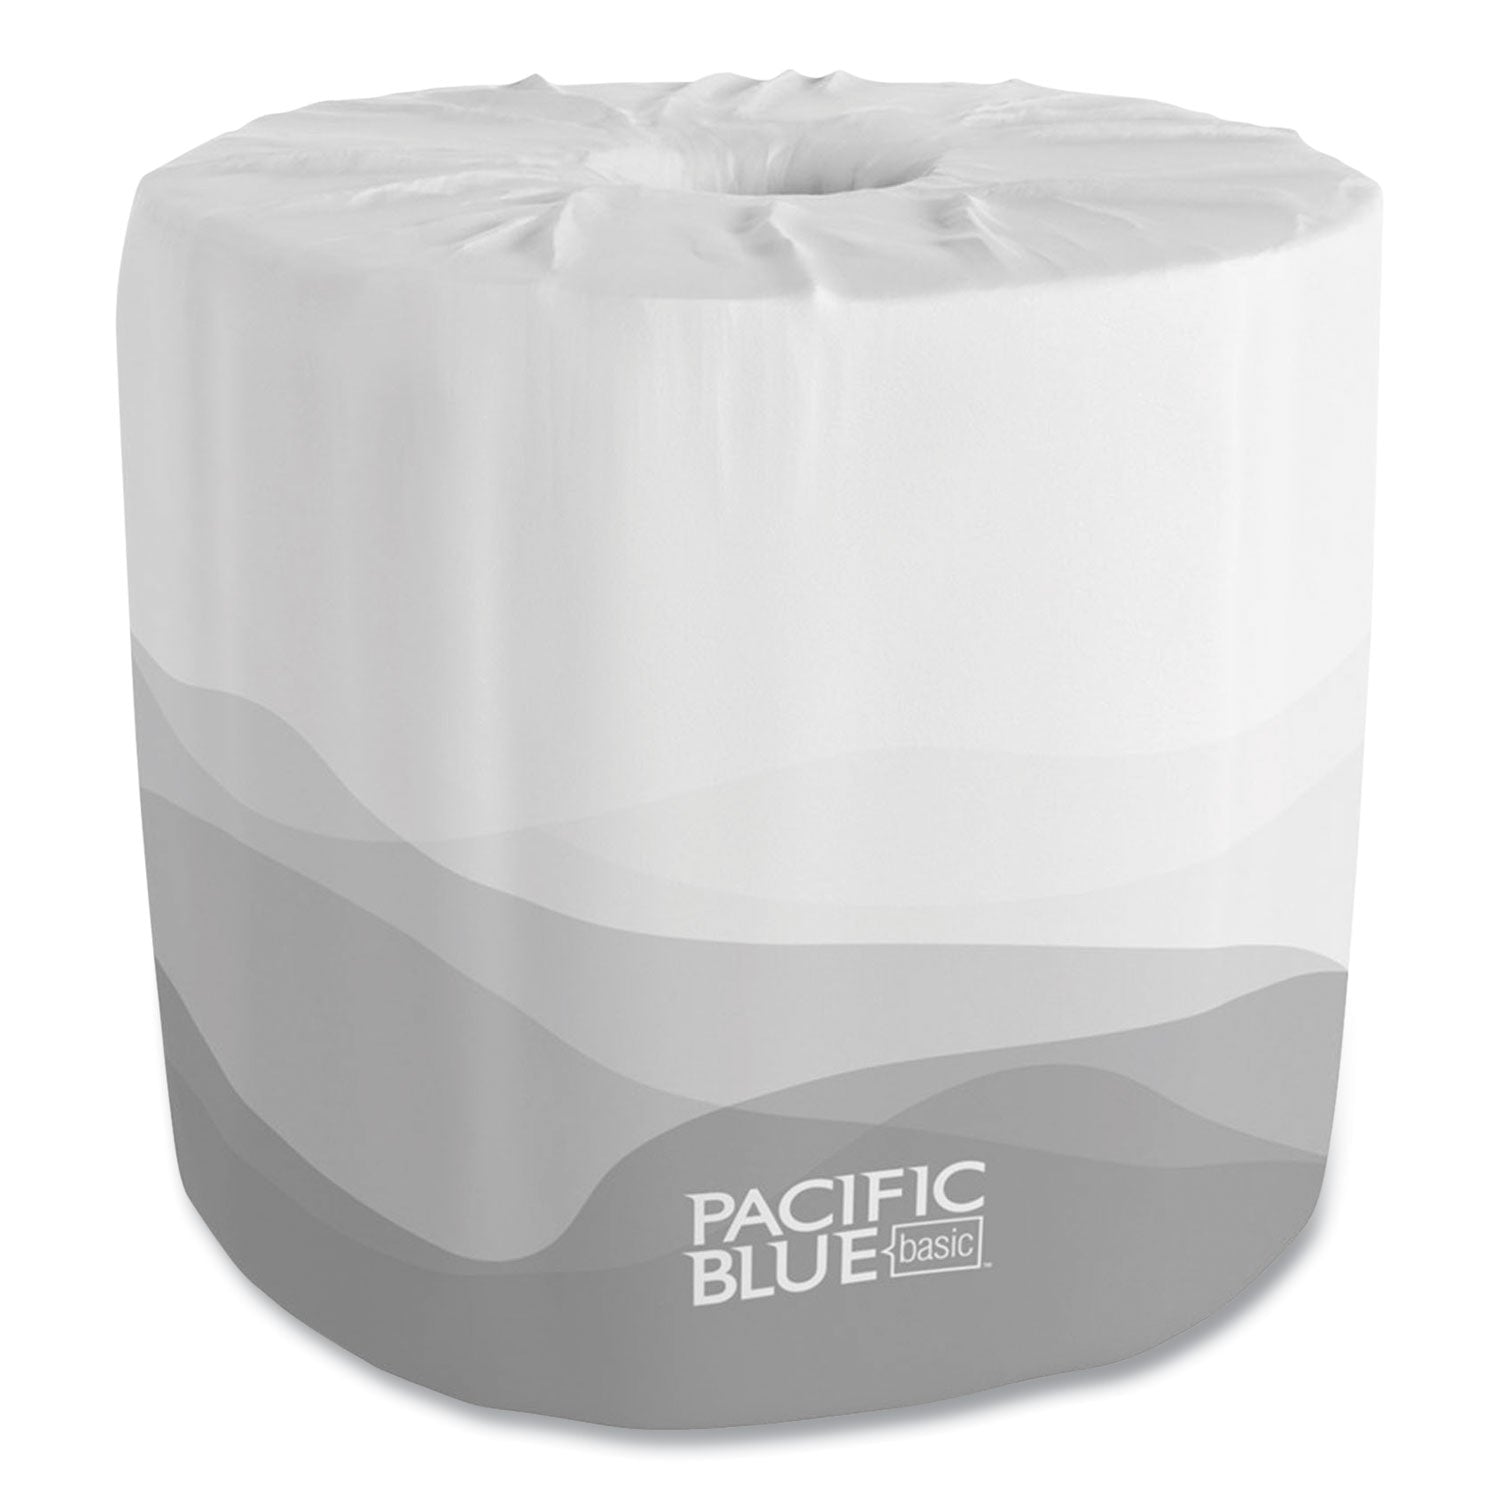 pacific-blue-basic-embossed-bathroom-tissue-septic-safe-1-ply-white-550-roll-80-rolls-carton_gpc1988101 - 1